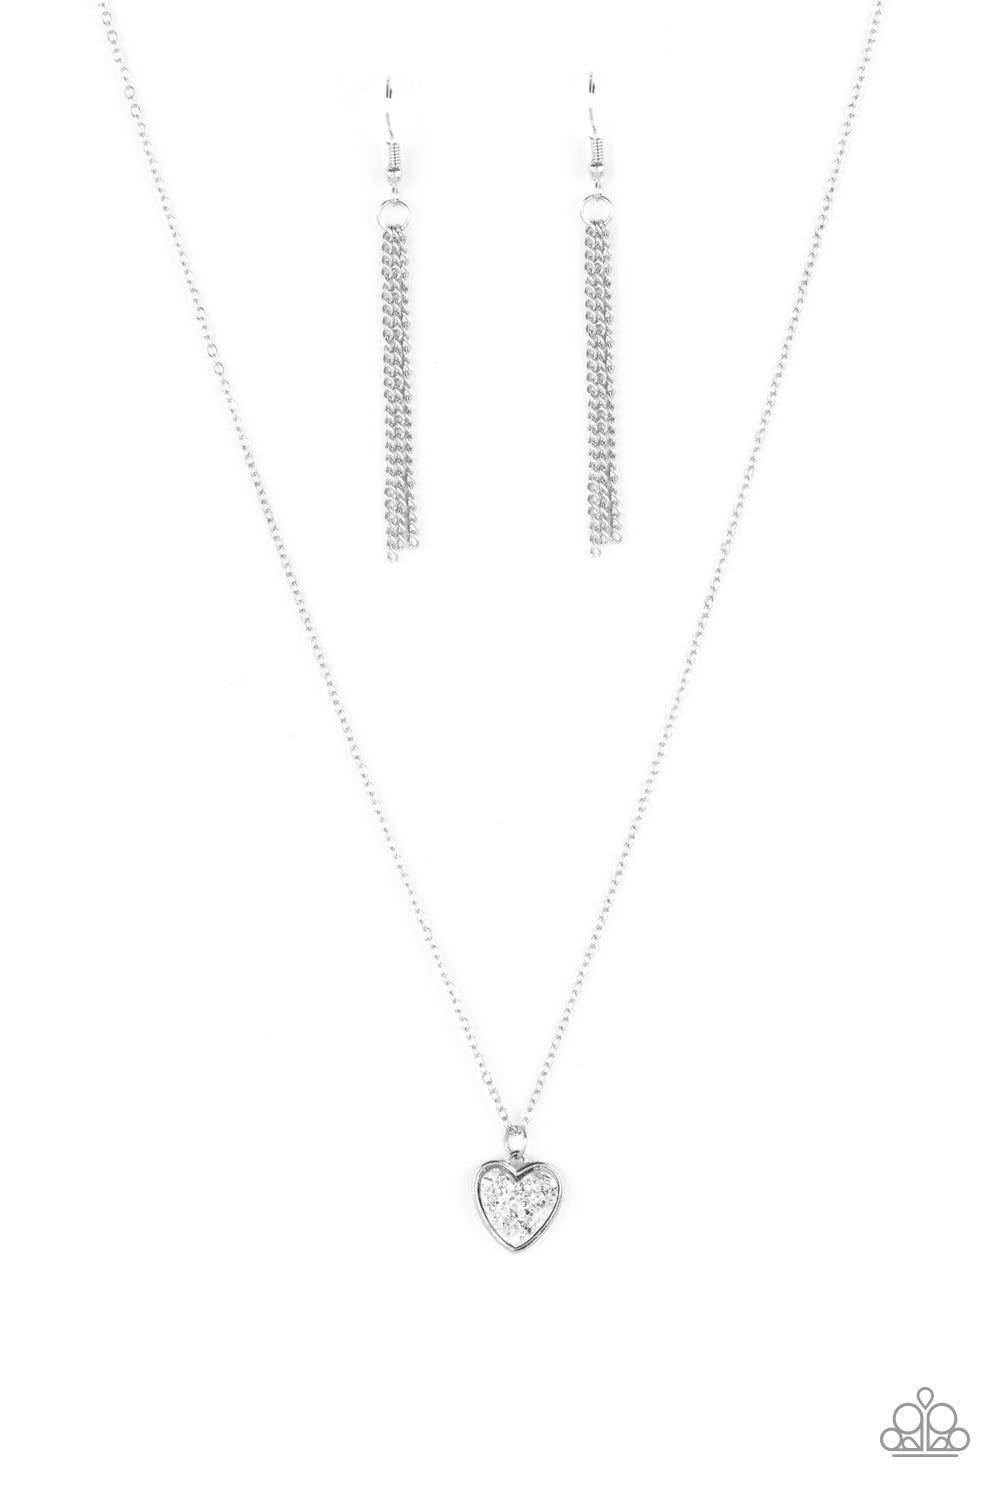 Paparazzi Pitter-Patter, Goes My Heart Silver Short Necklace